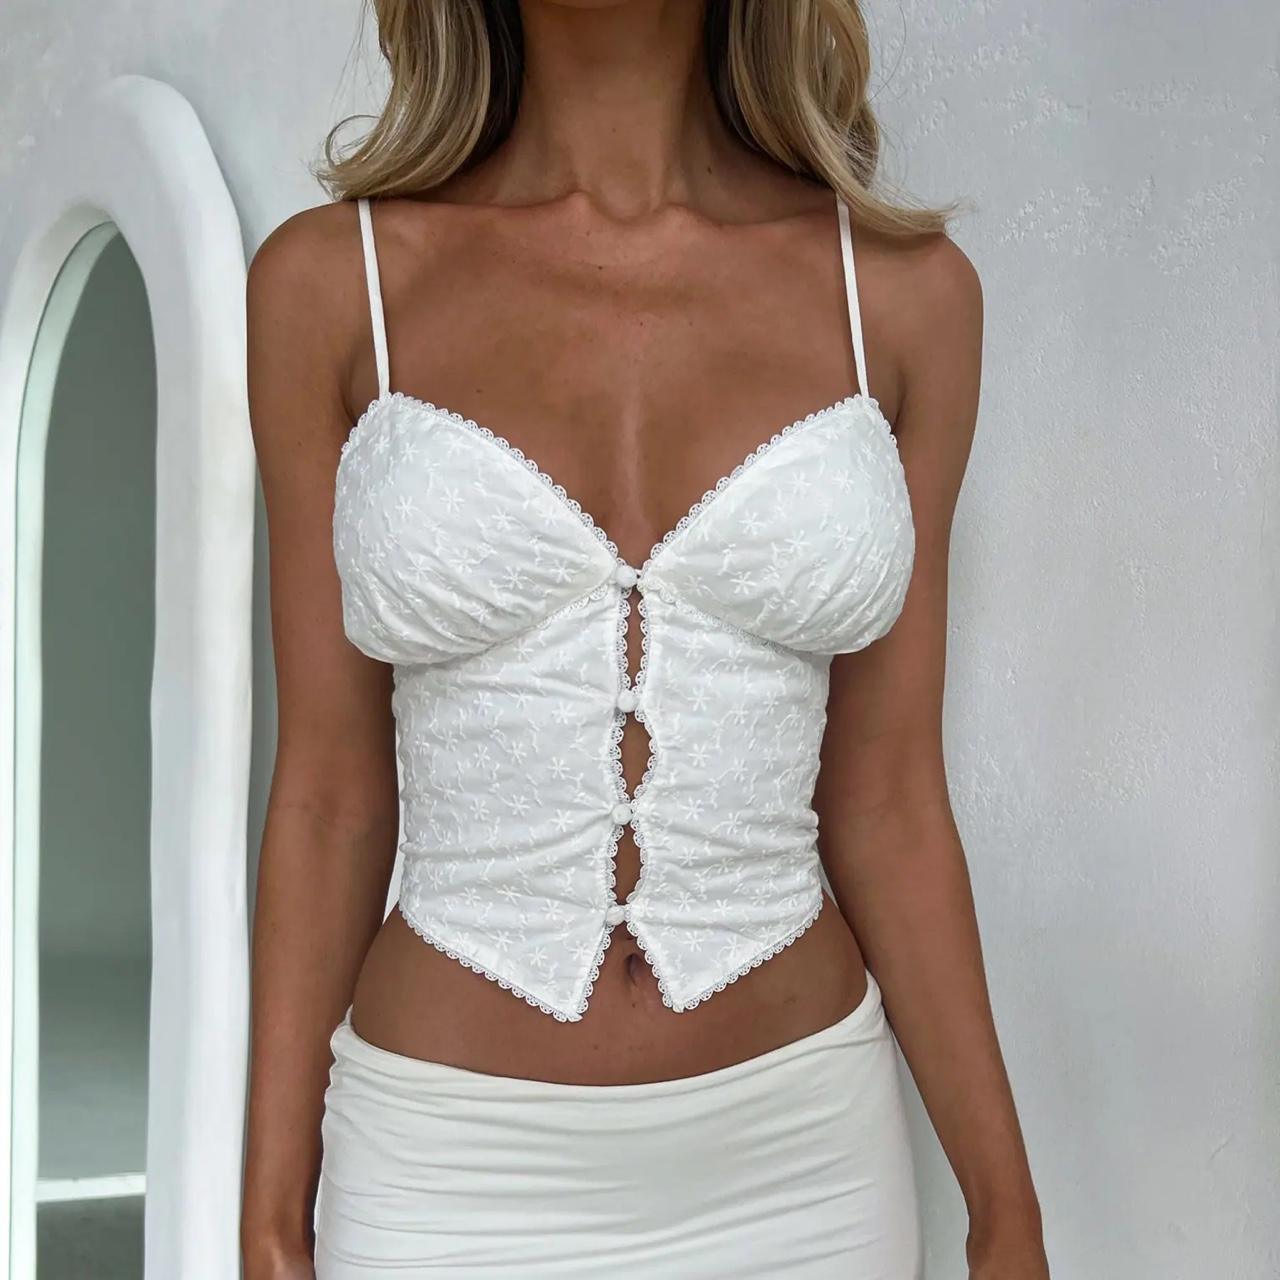 Tiger Mist Longline Corset Top White Size XL - $35 (30% Off Retail) - From  Janeth